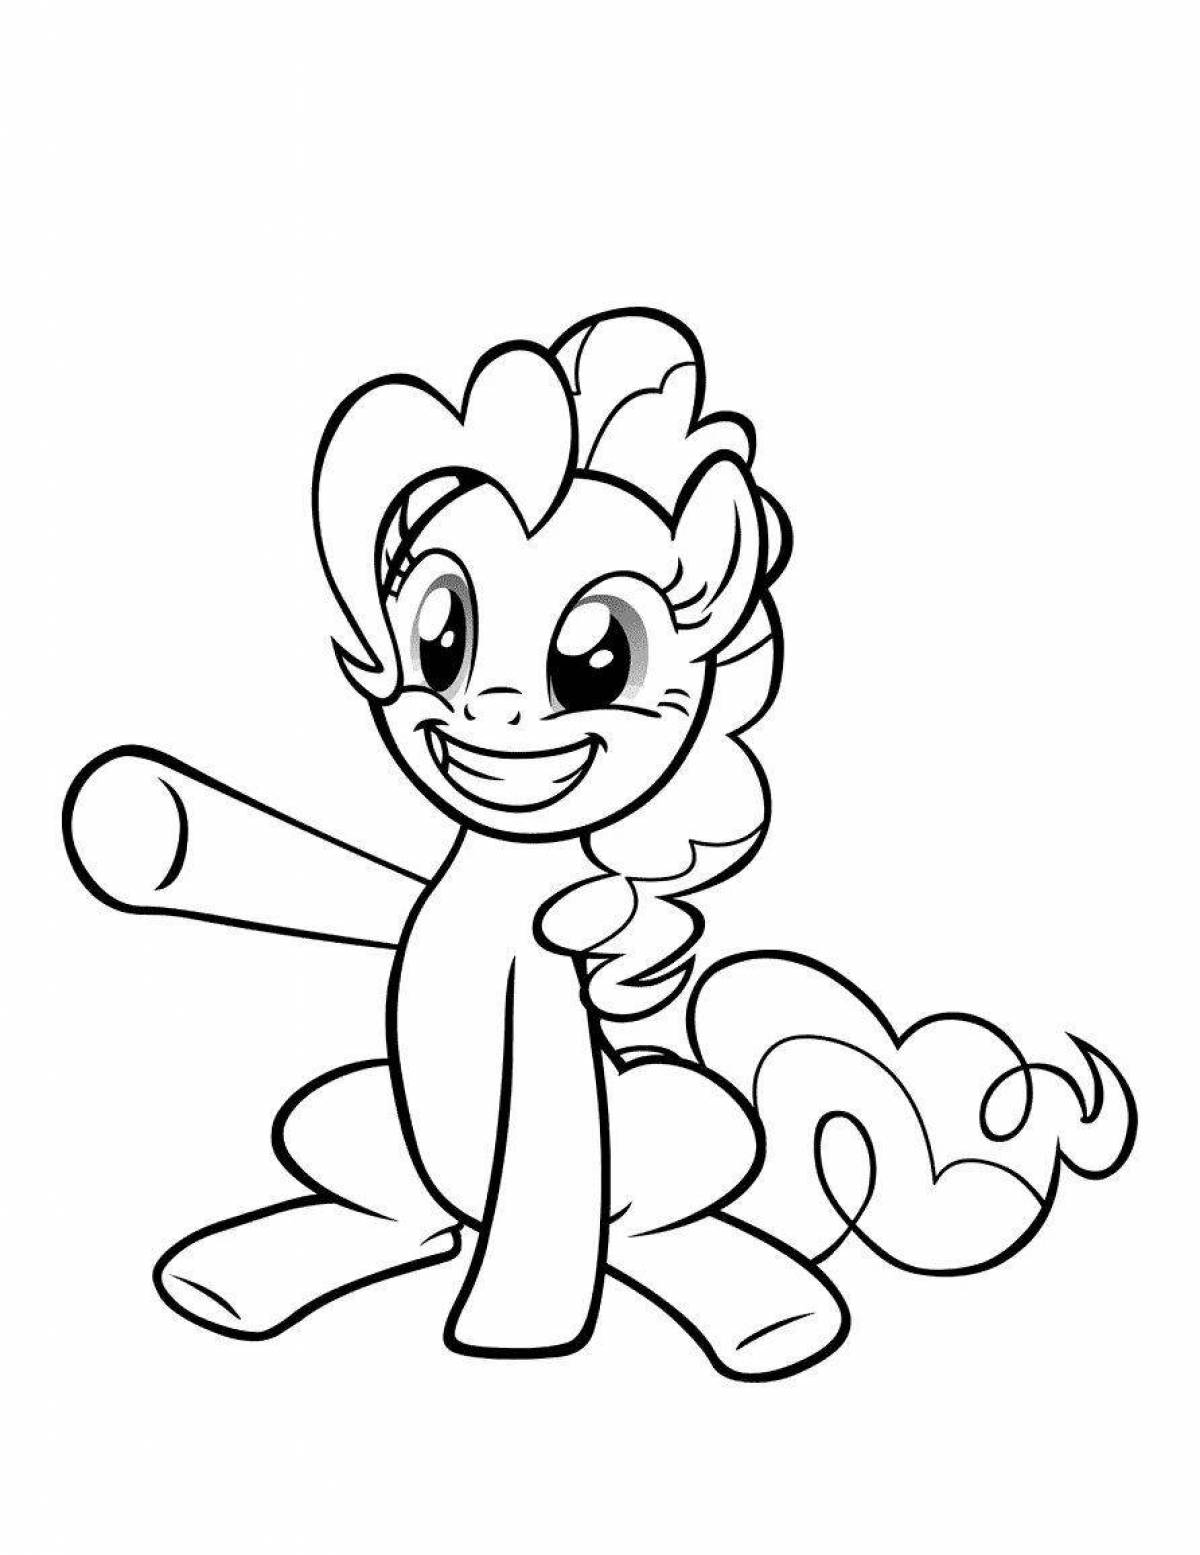 Pinkie Pie glowing pony coloring book